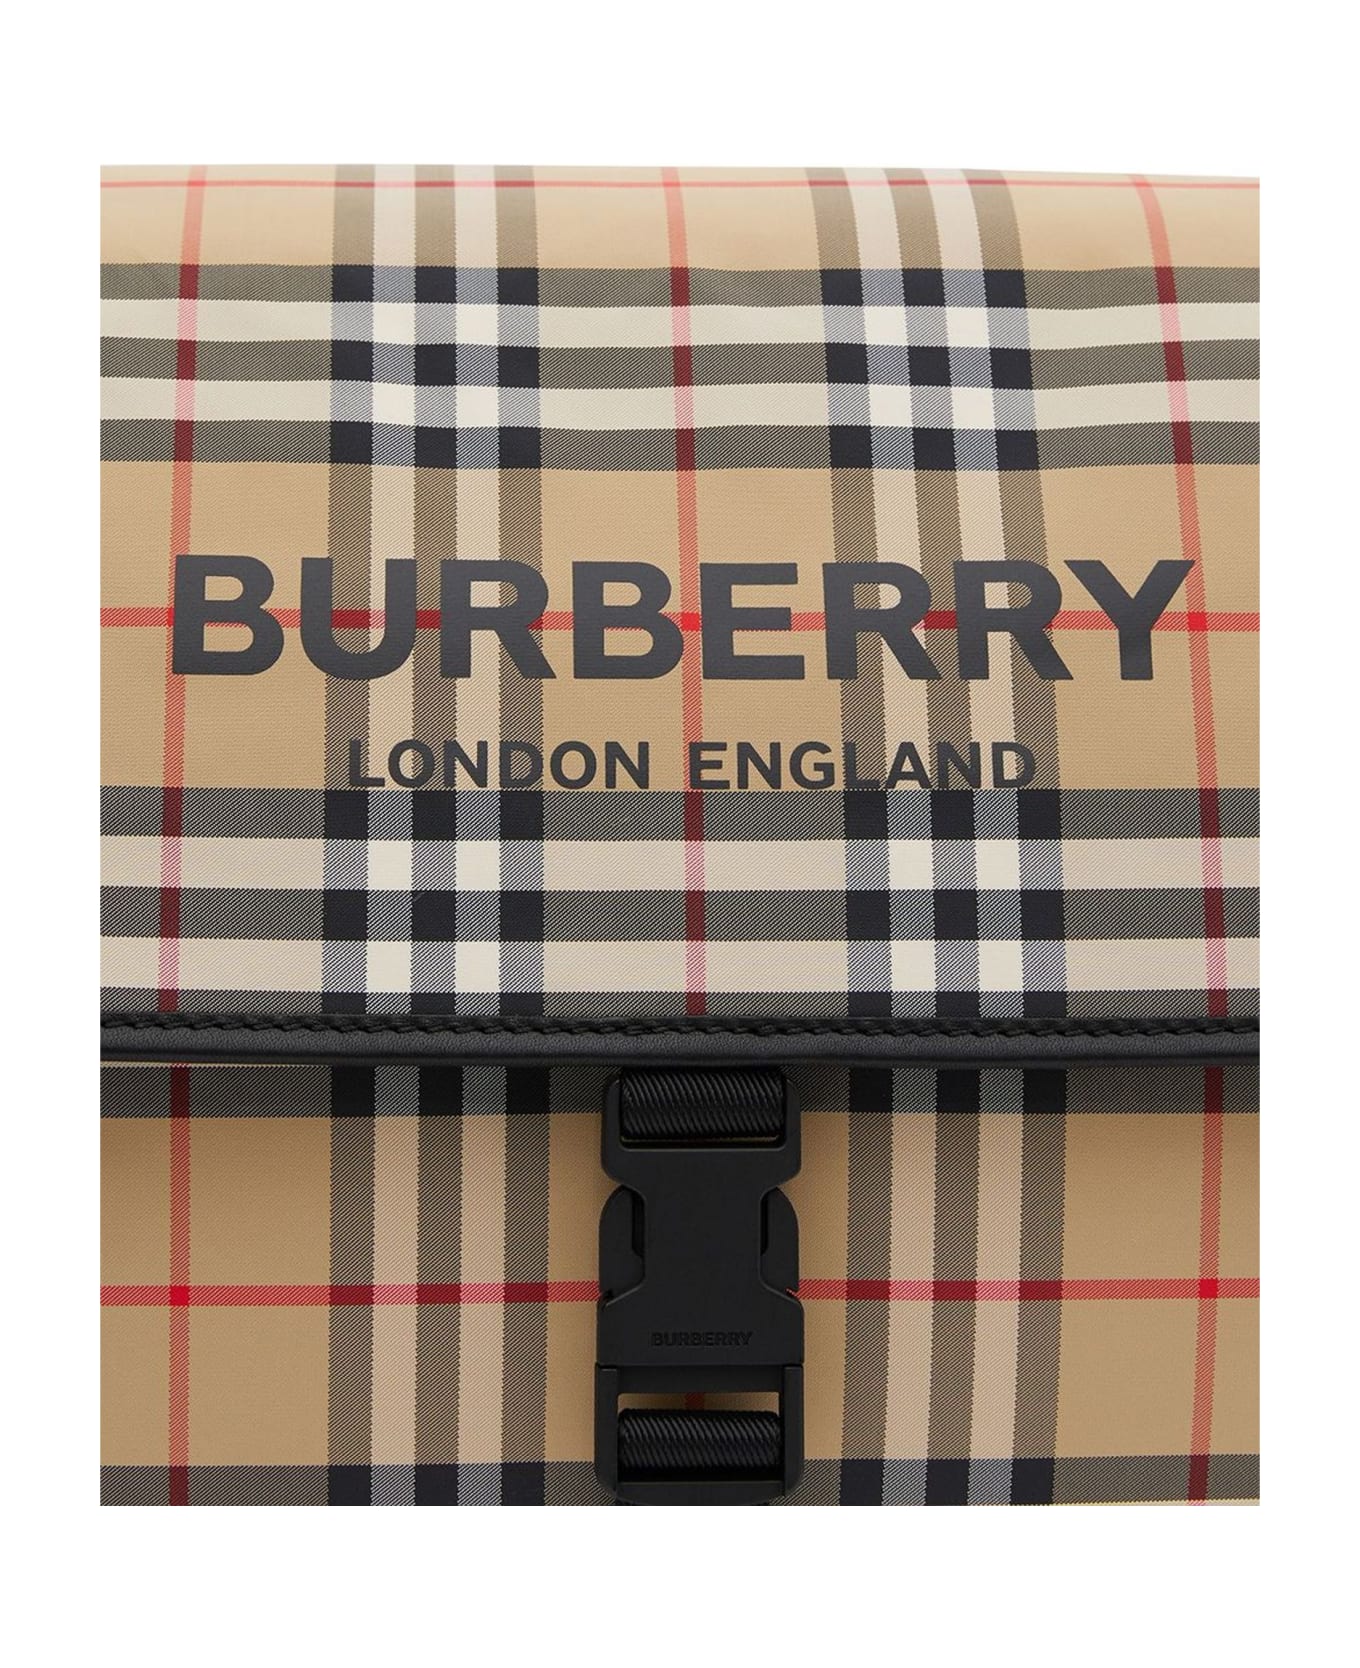 Burberry Brown Baby Changing Bag - Check